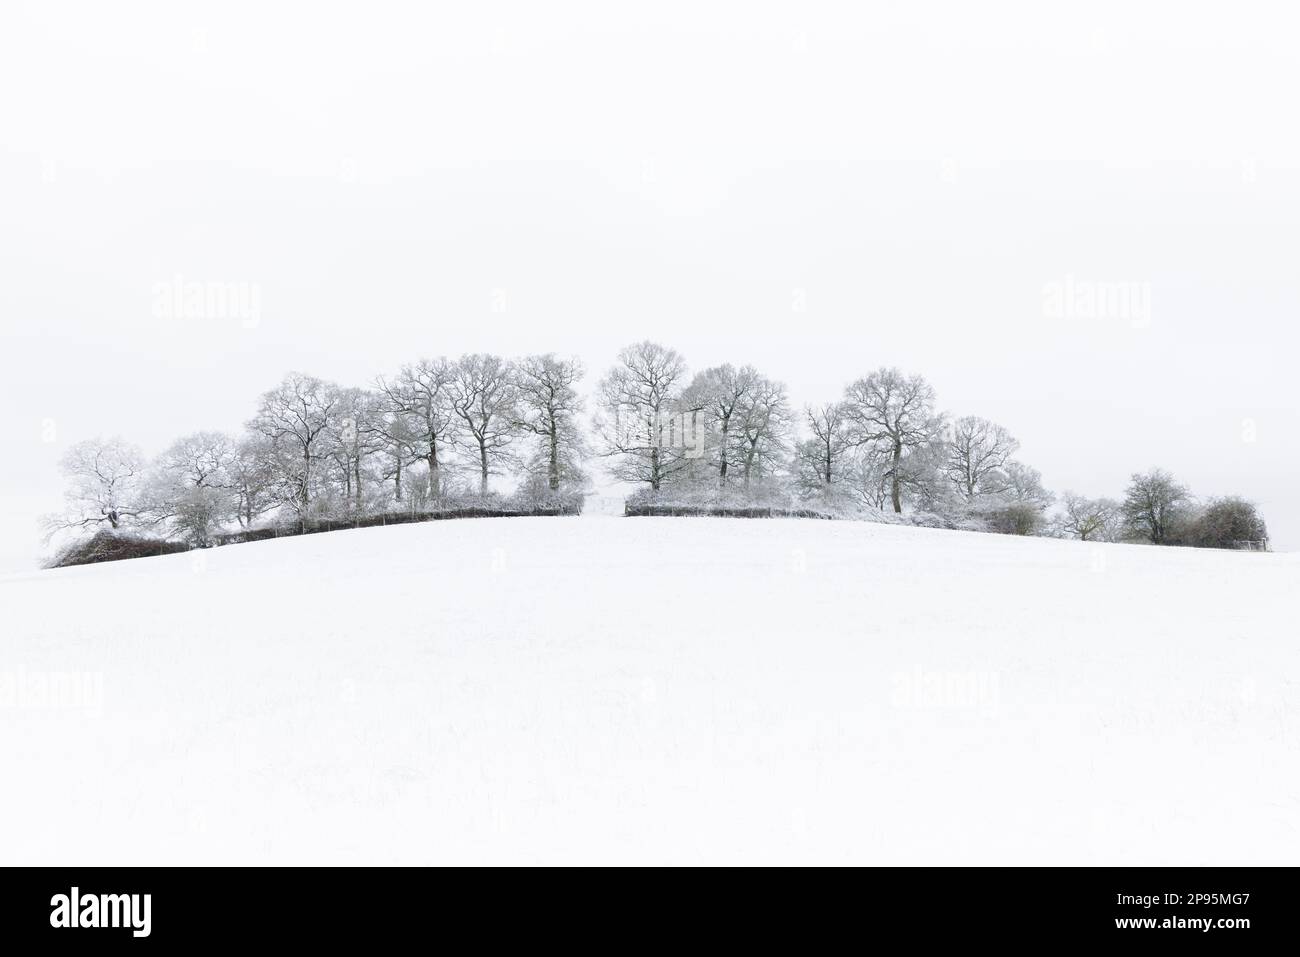 Northamptonshire, England: A minimalist landscape image of a line of trees along the brow of a snow-covered hill beneath a featureless pale sky. Stock Photo